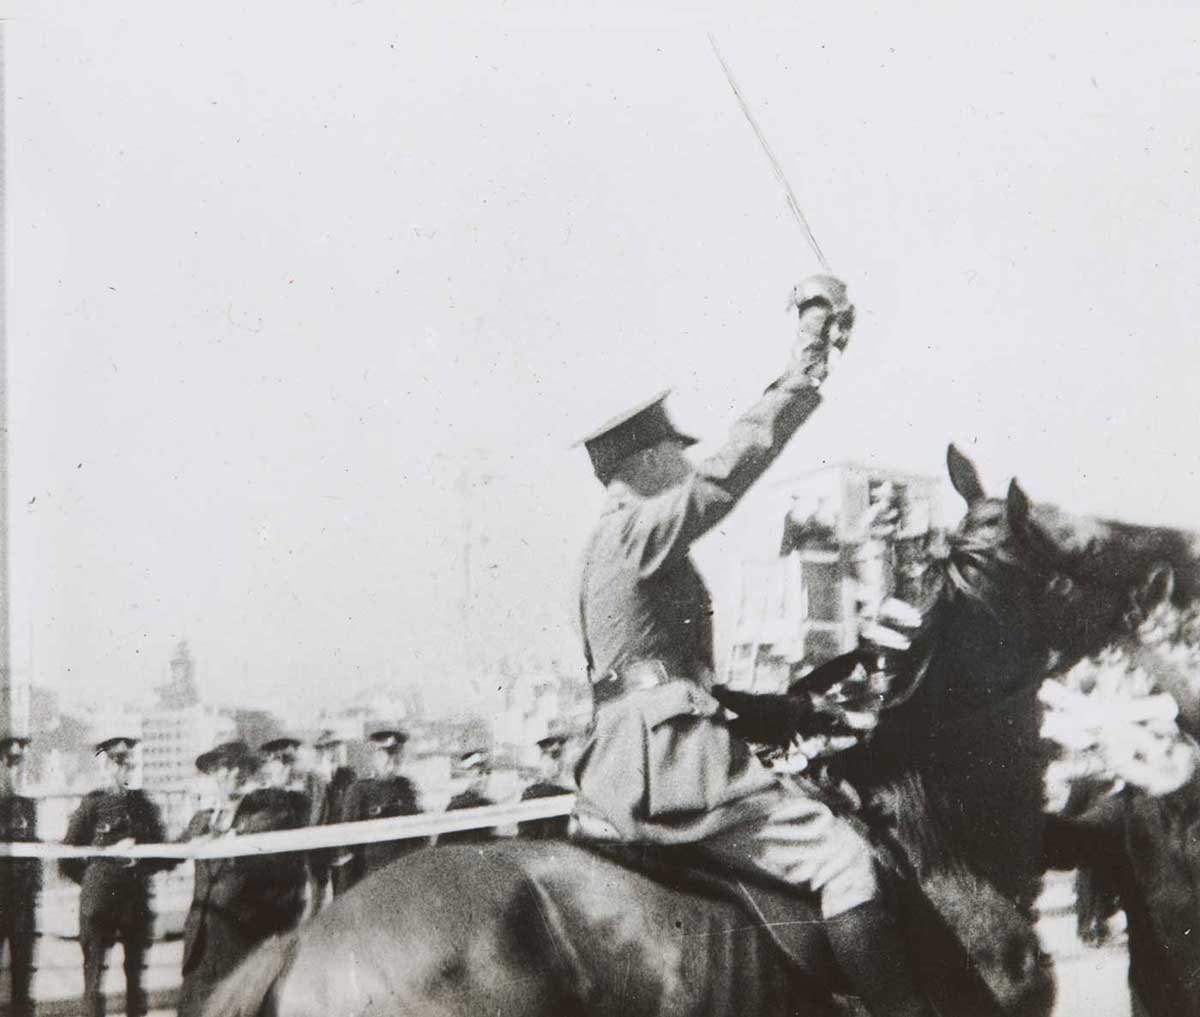 Black and white photo of a man on horseback with sword raised as he approaches a ribbon.  - click to view larger image